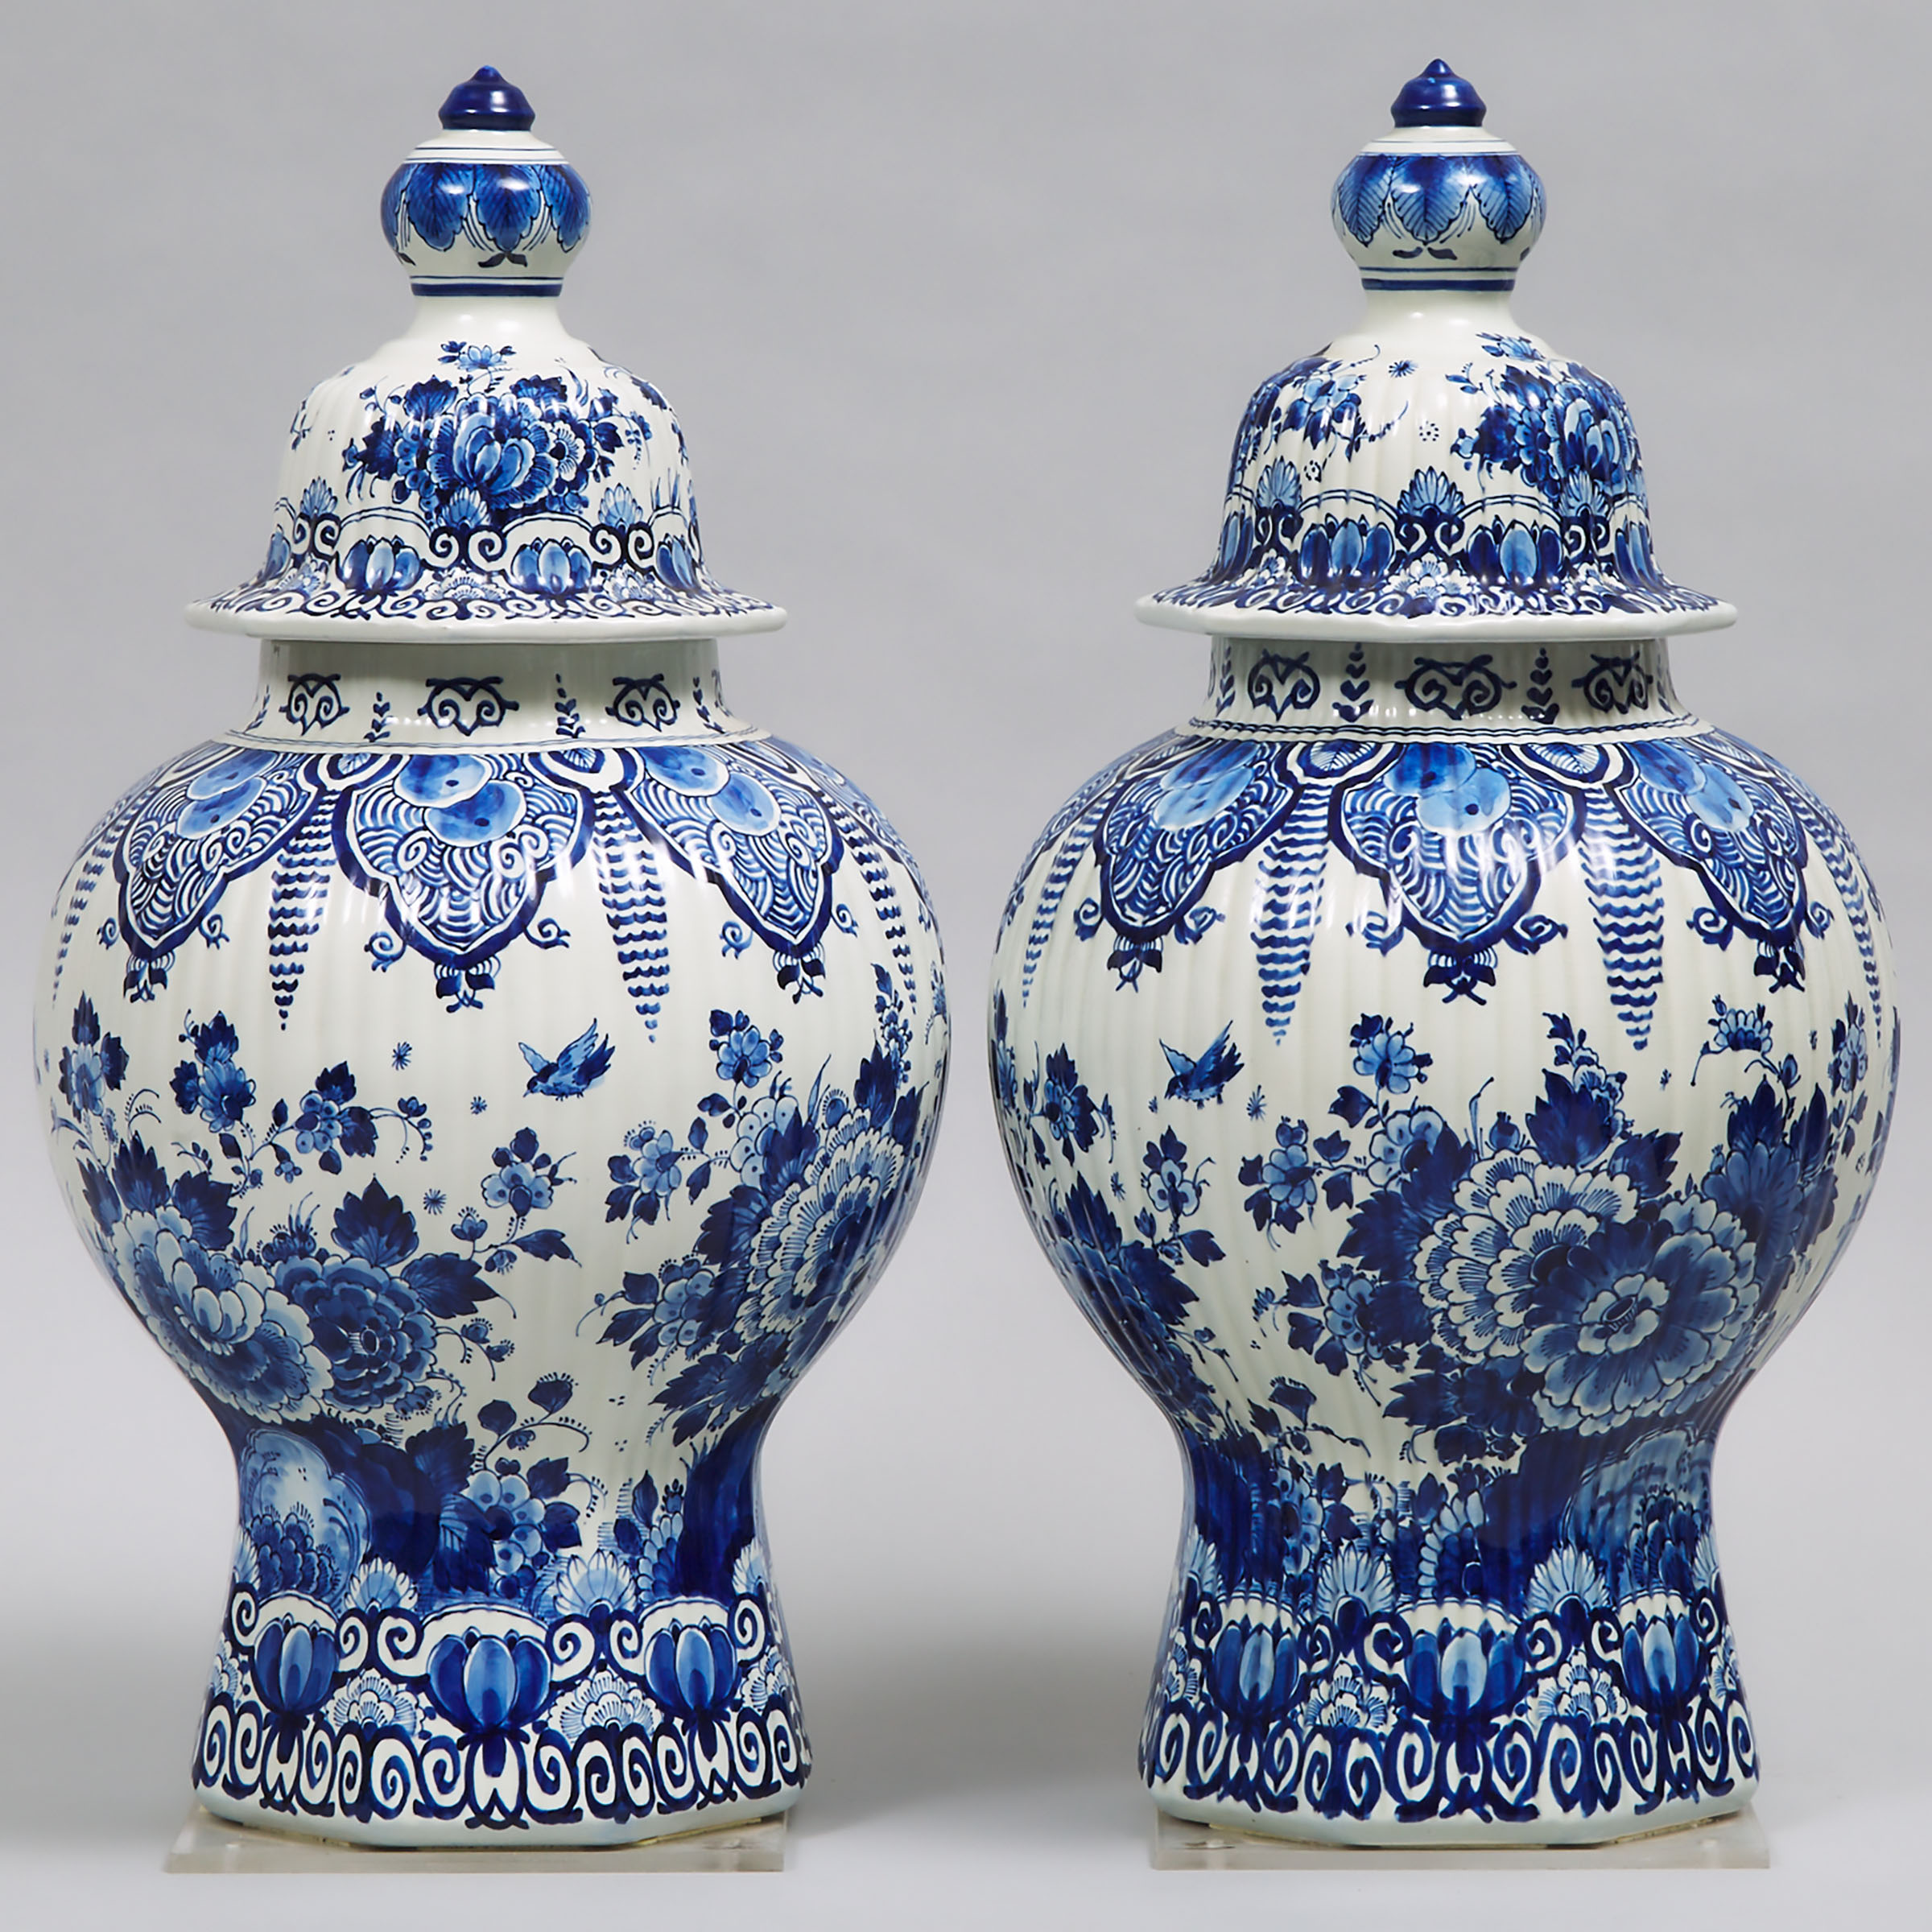 Pair of Delft Fluted Octagonal Baluster Covered Vases, 20th century